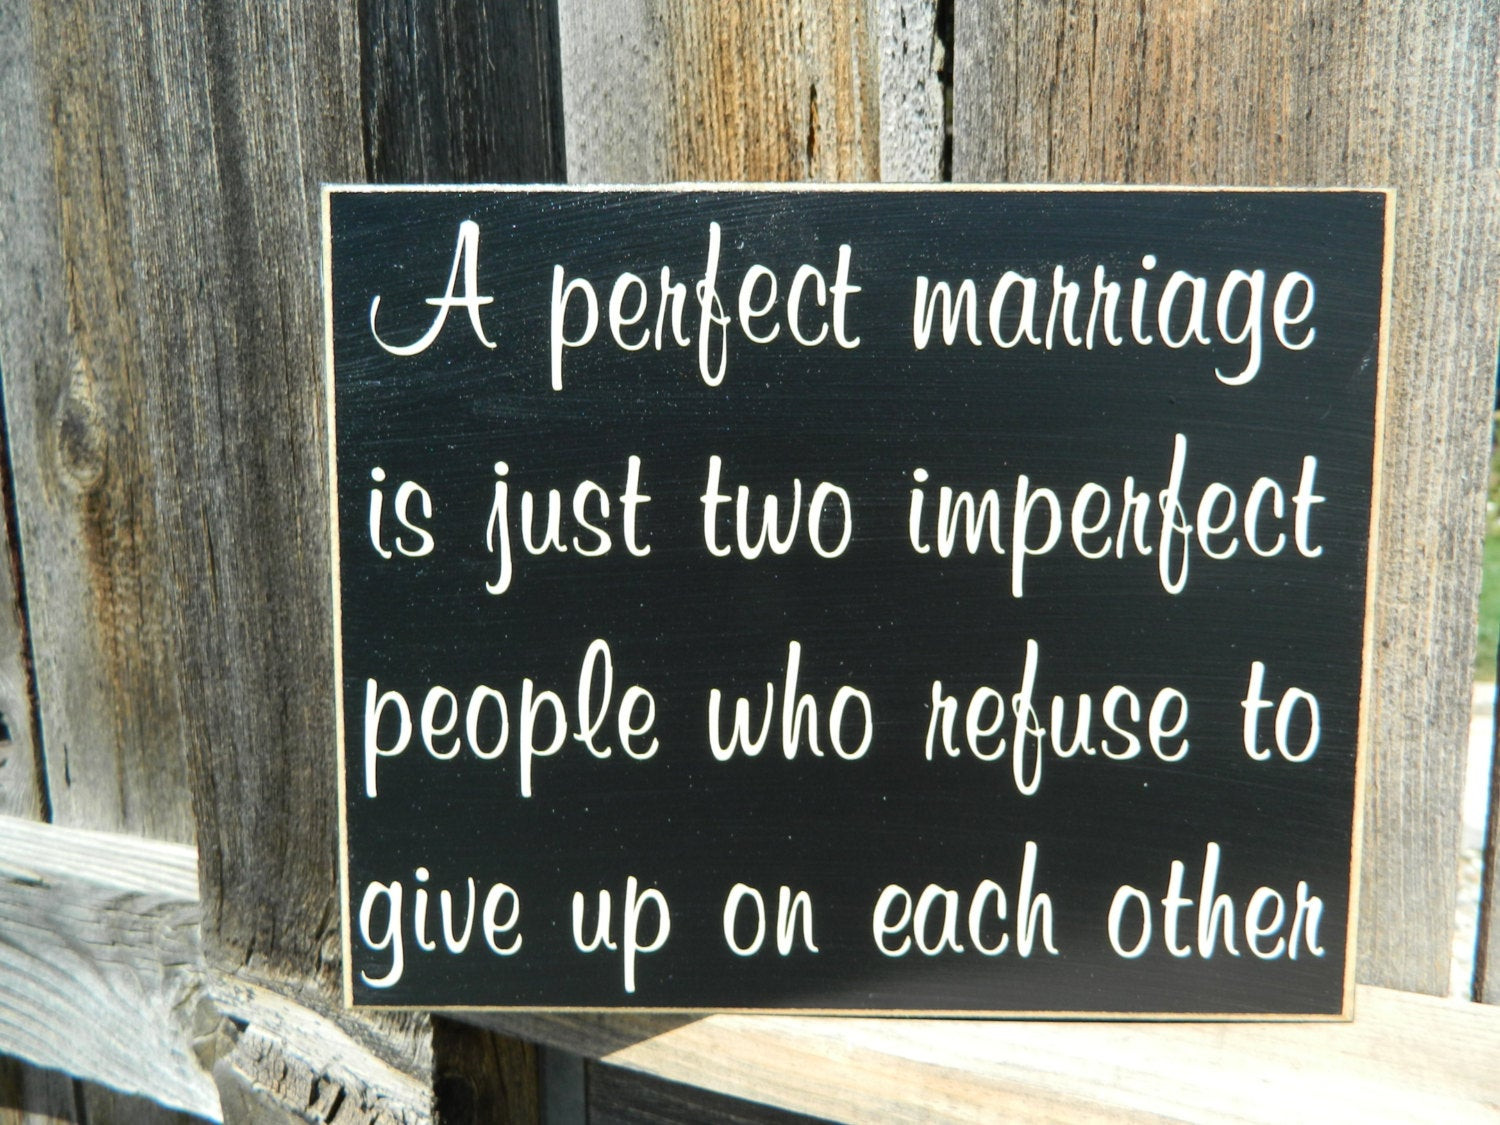 Marriage Motivational Quotes
 Inspirational QuoteA perfect marriage wood sign